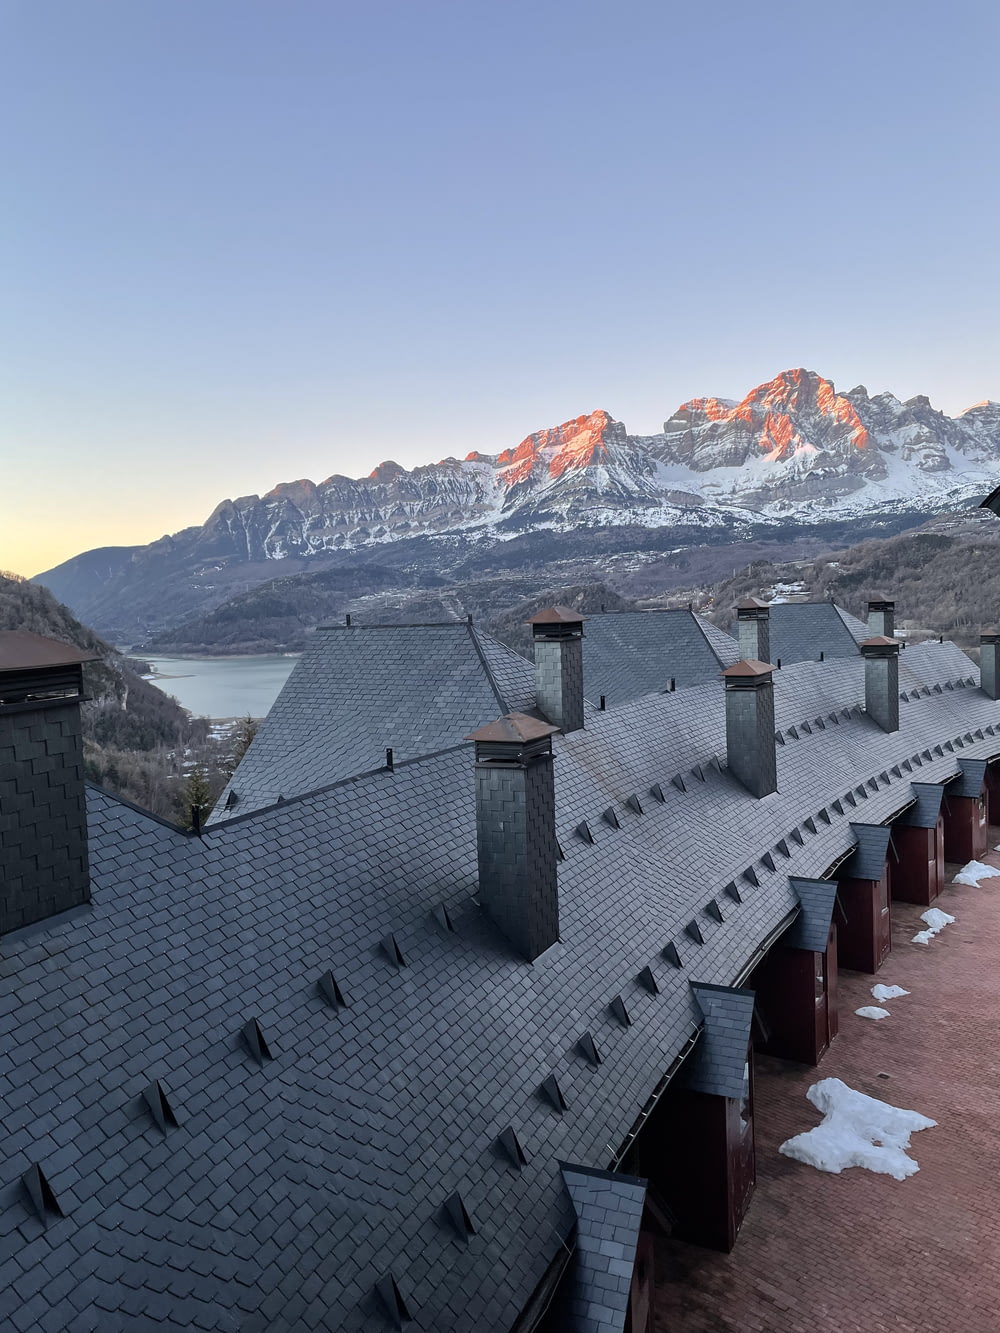 the roof of a building with mountains in the background